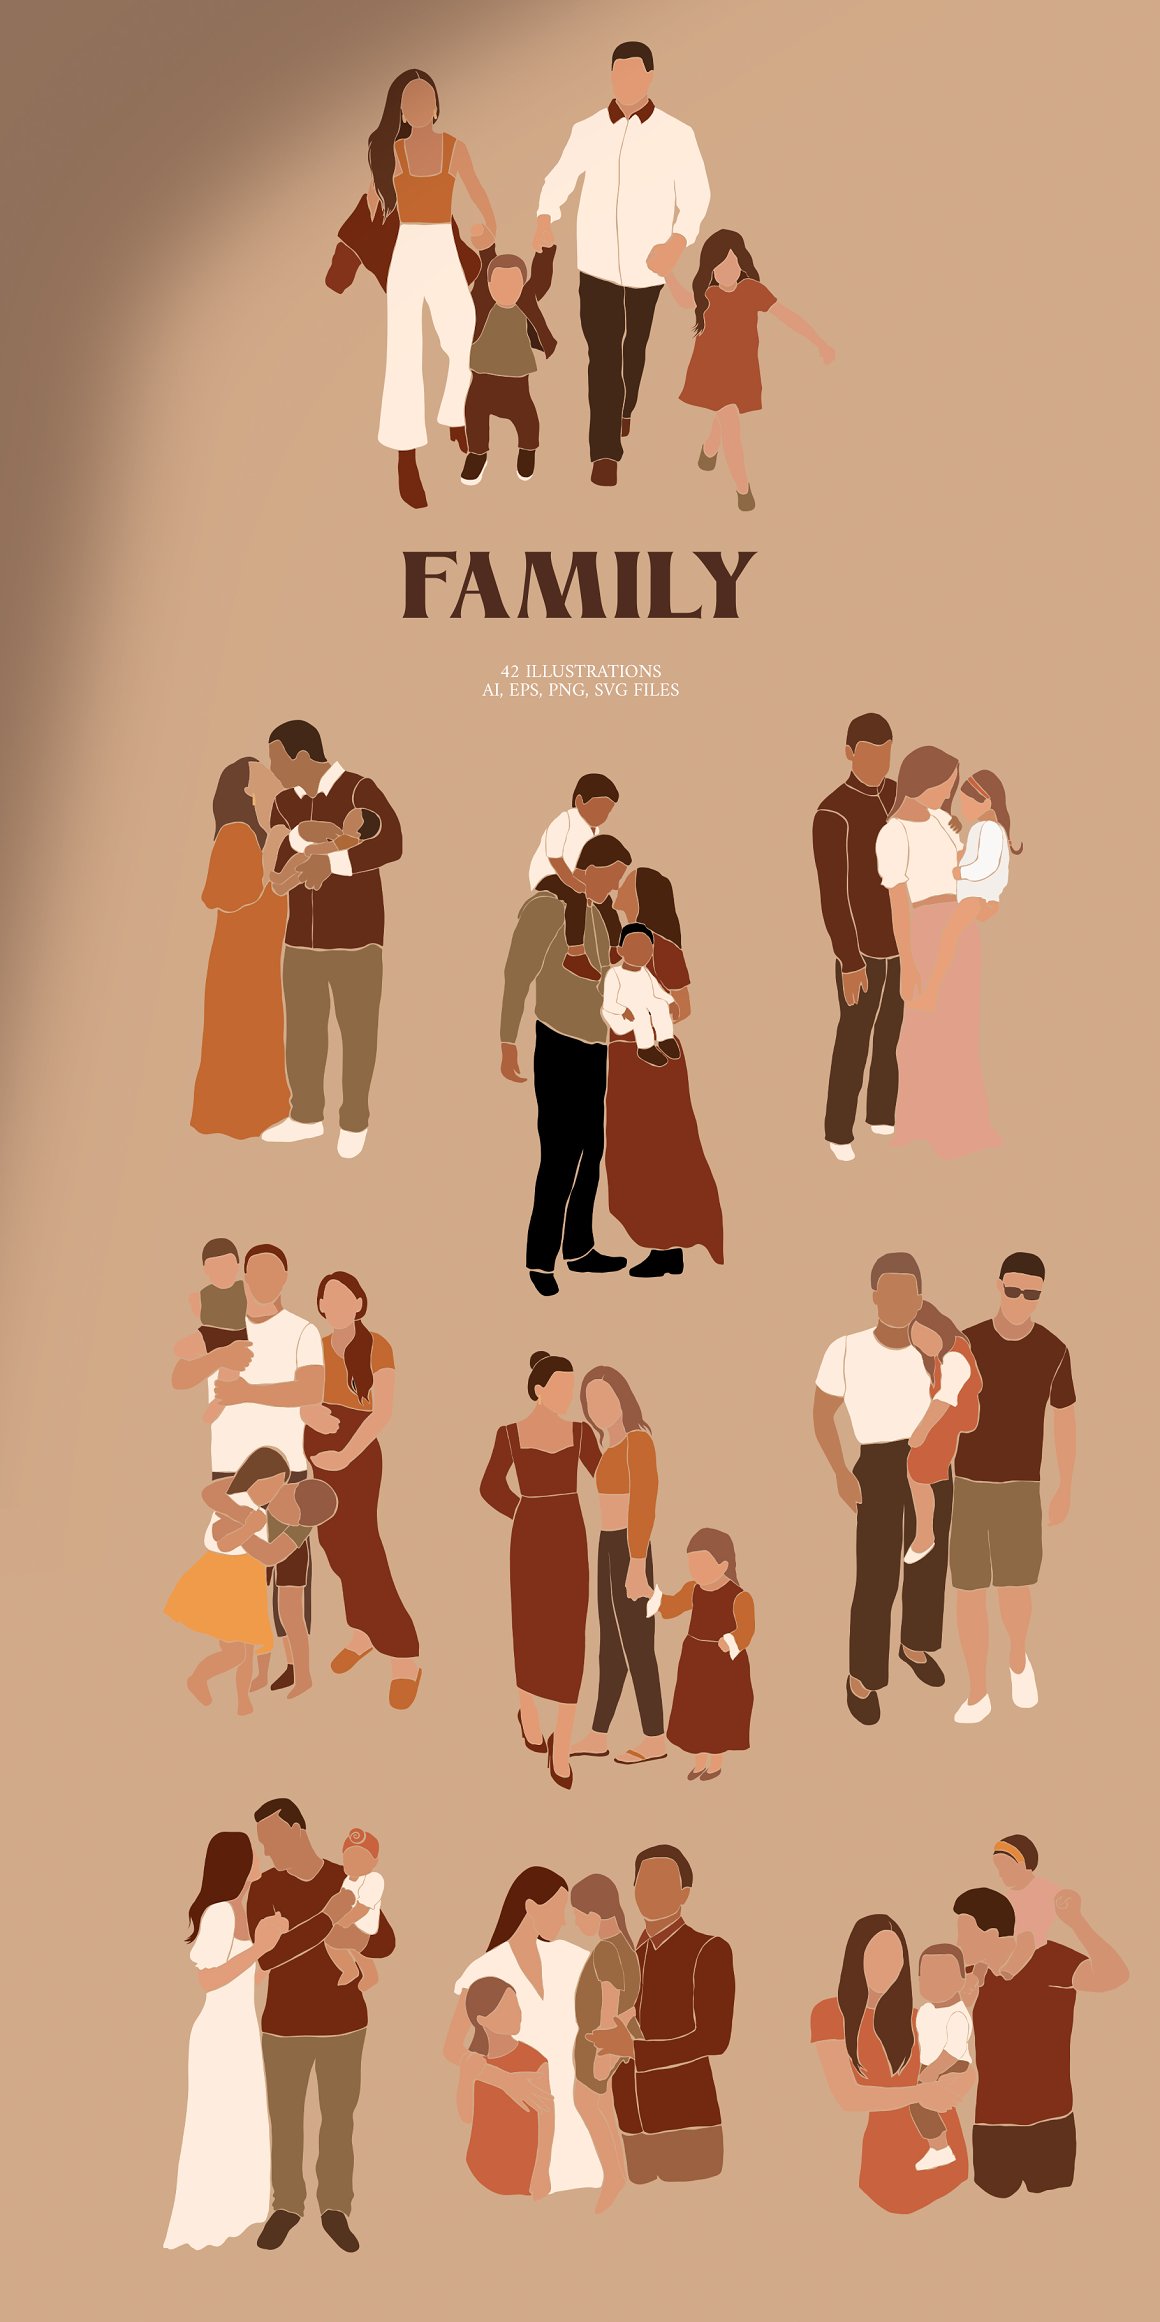 A set of 10 different beautiful family illustrations.